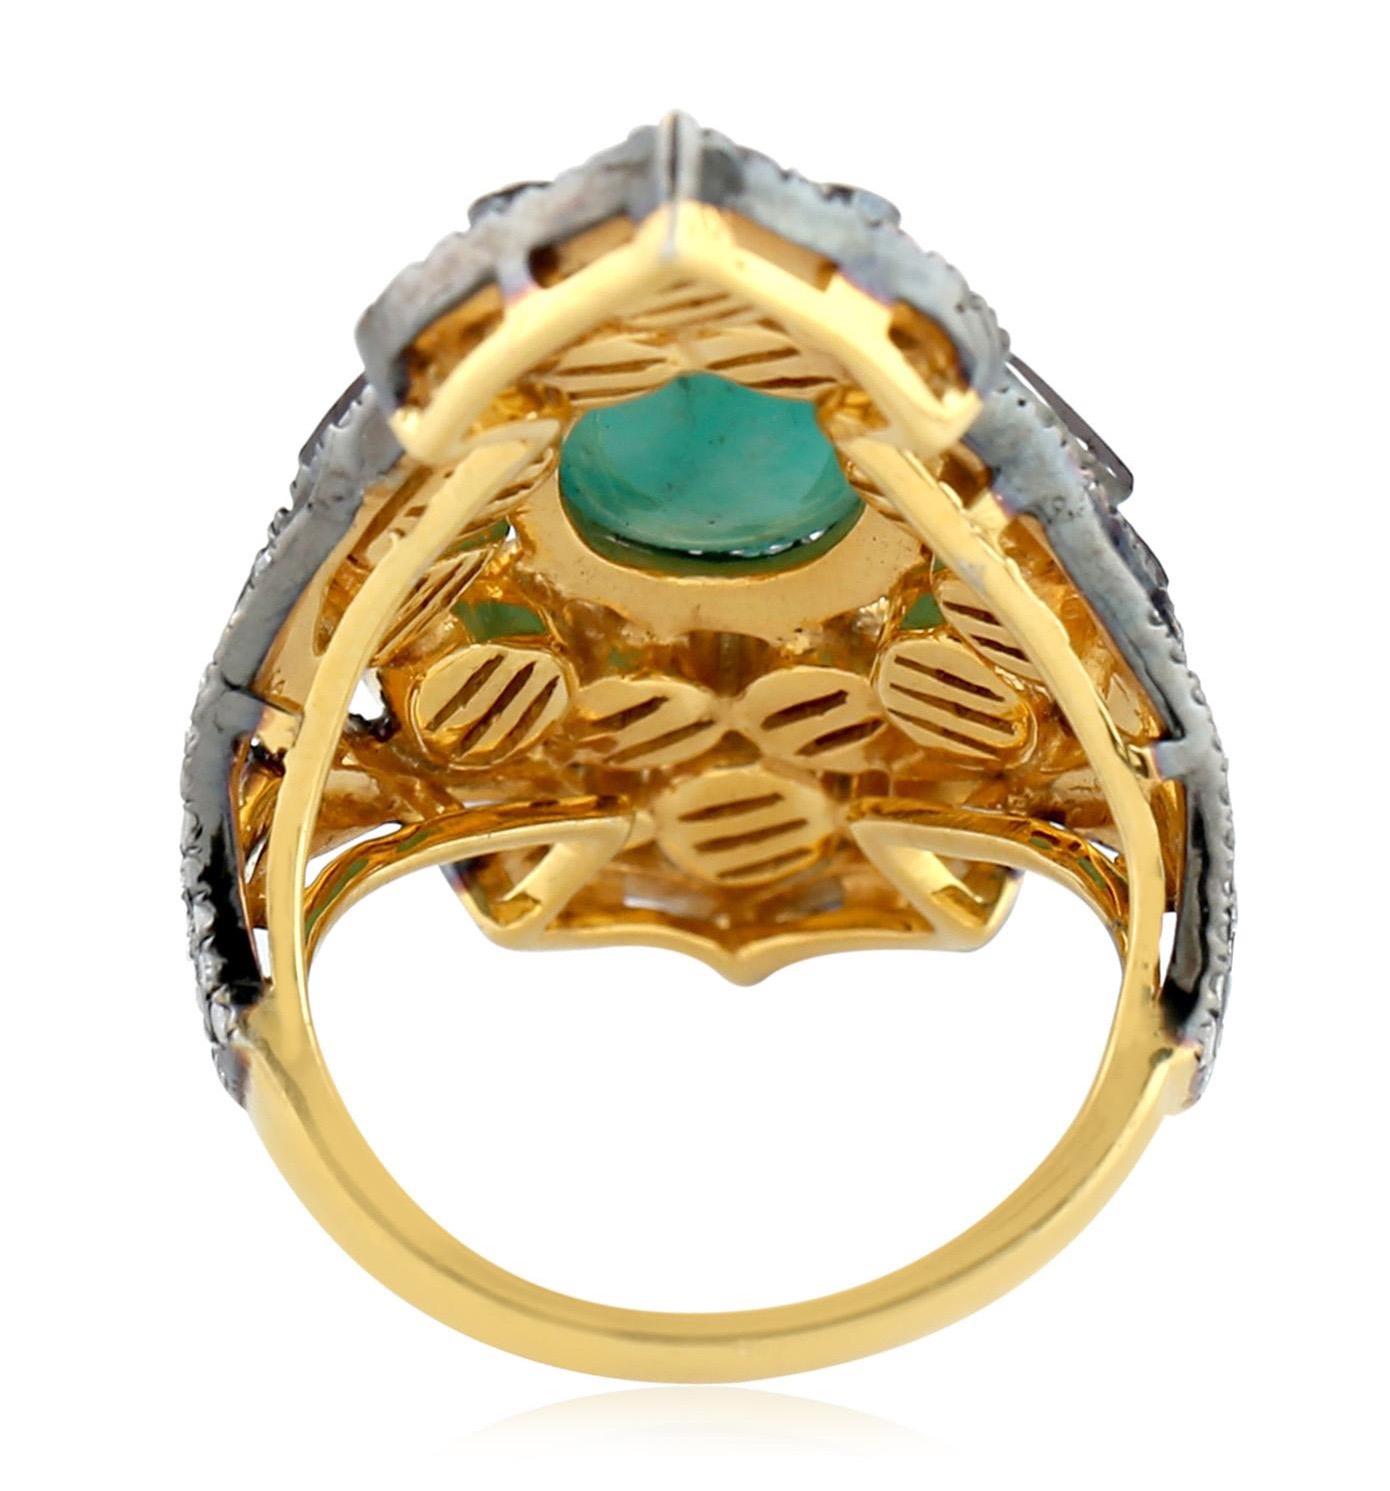 Contemporary 3.65 Carat Rosecut Diamond Emerald Cocktail Ring For Sale